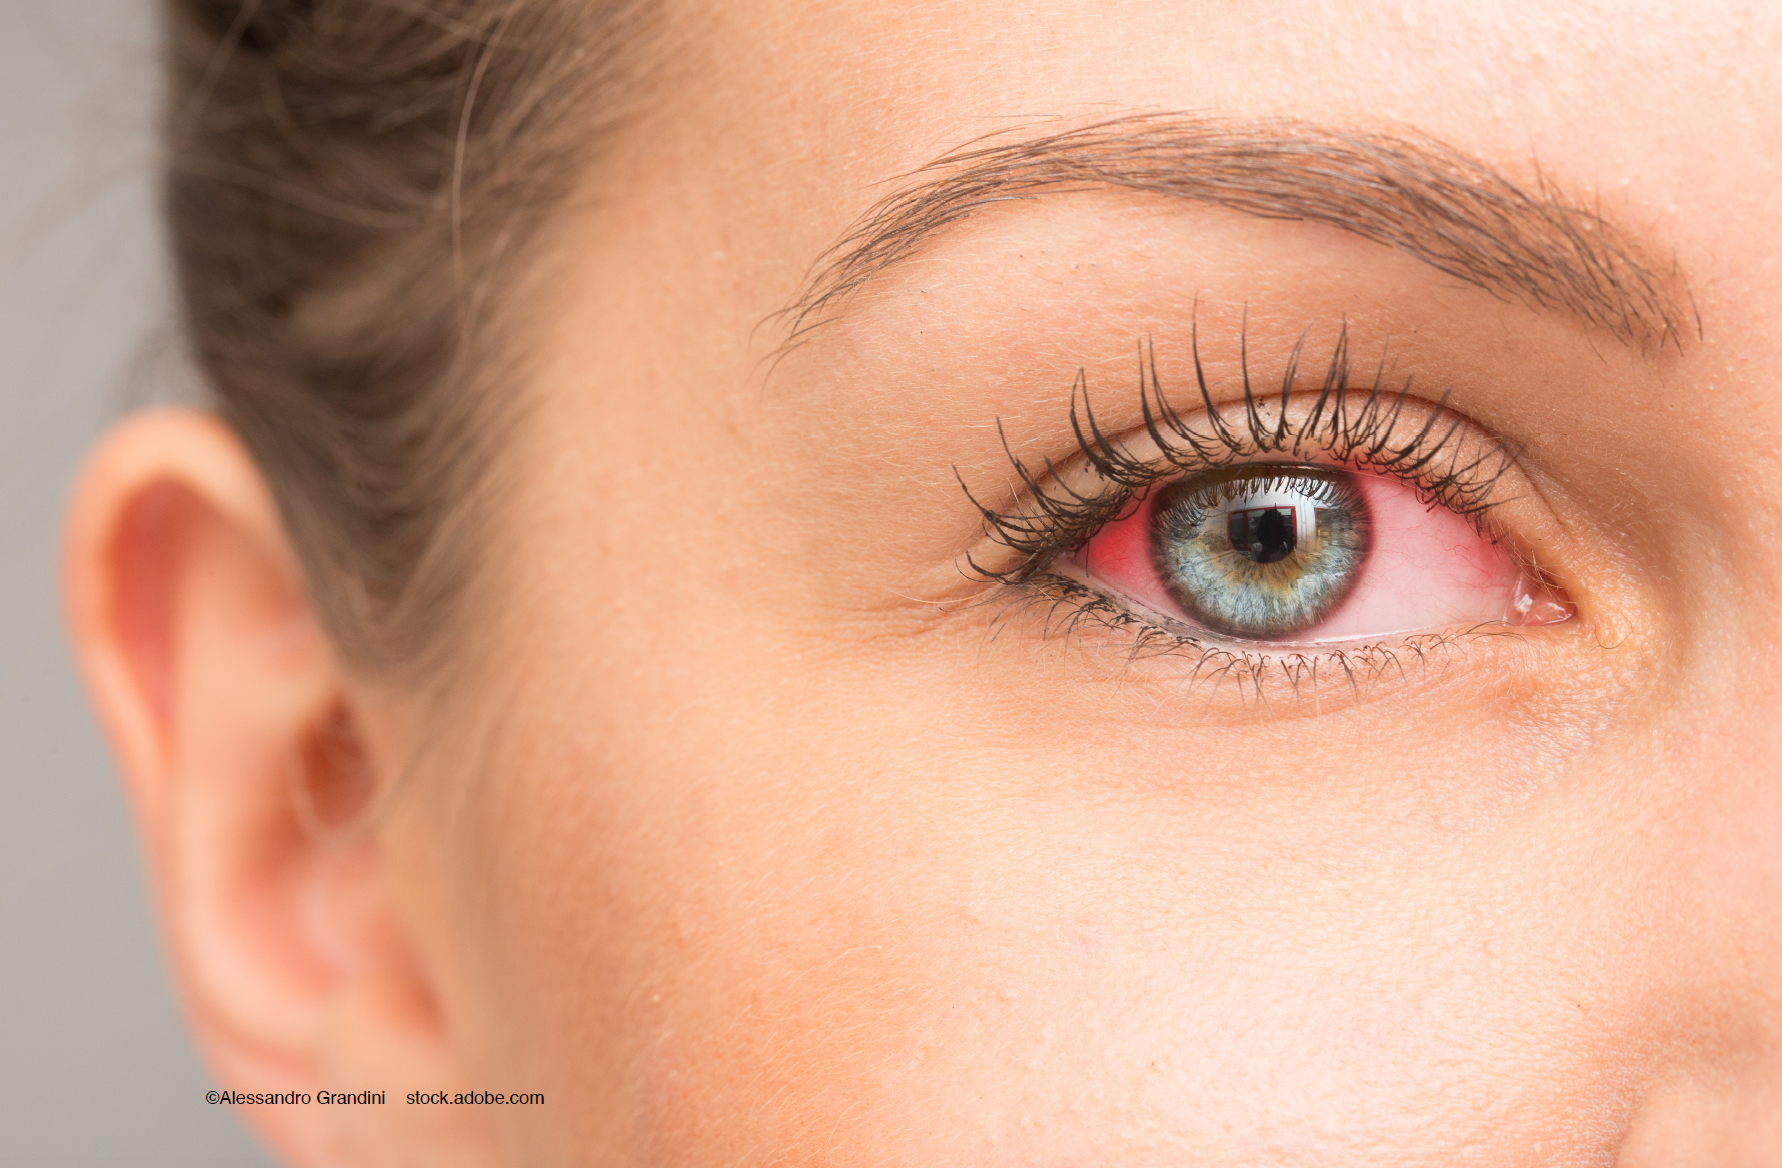 Optineurin: Defending against viral infections of the eye